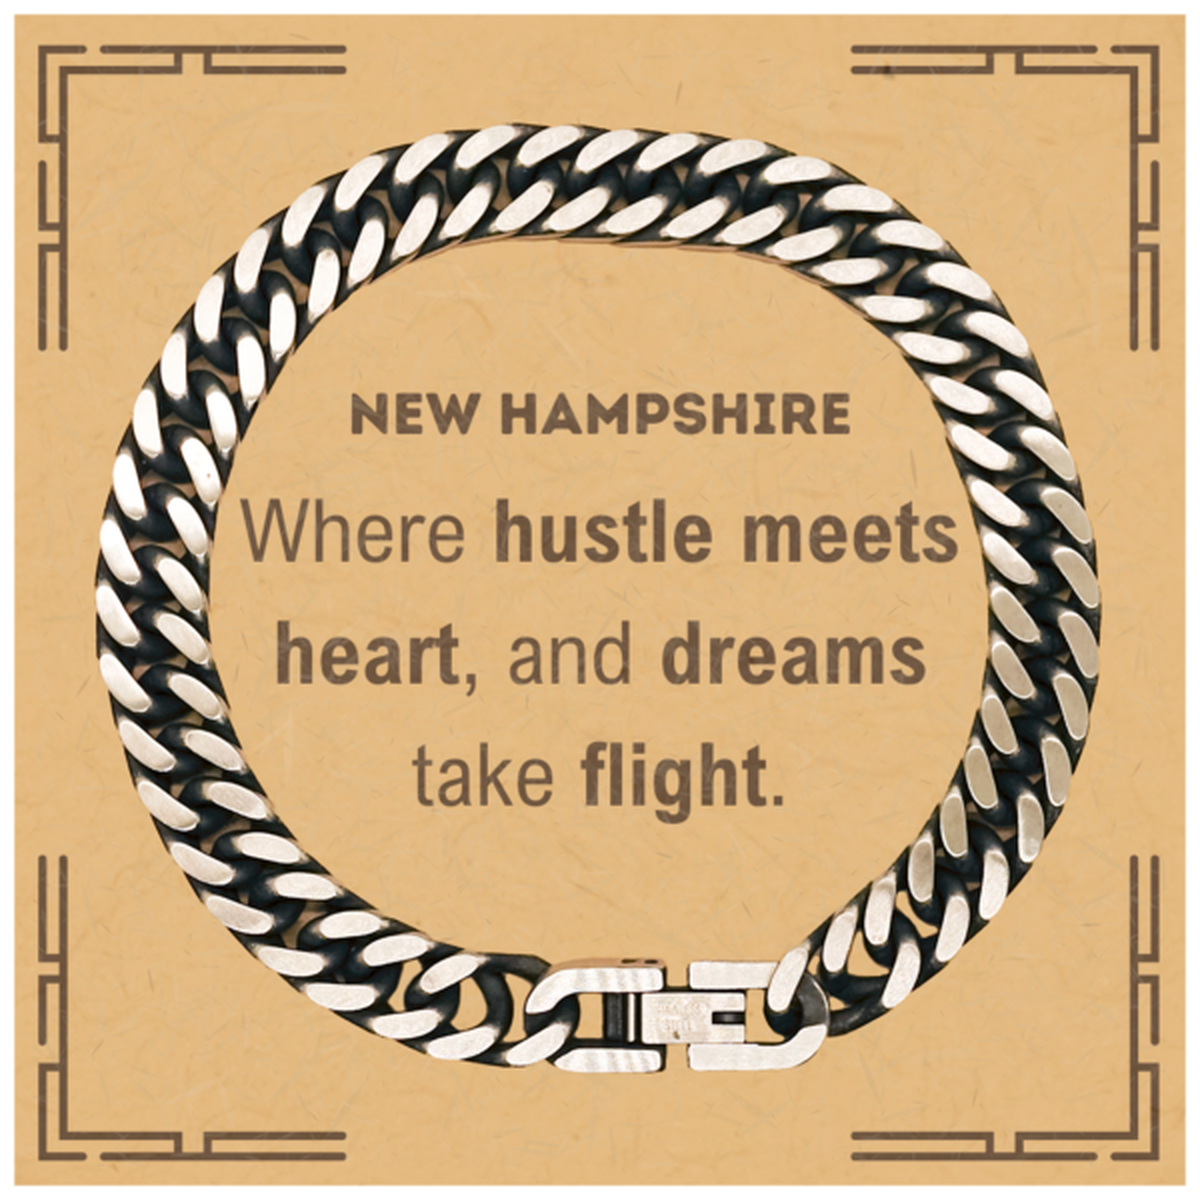 New Hampshire: Where hustle meets heart, and dreams take flight, New Hampshire Card Gifts, Proud New Hampshire Christmas Birthday New Hampshire Cuban Link Chain Bracelet, New Hampshire State People, Men, Women, Friends